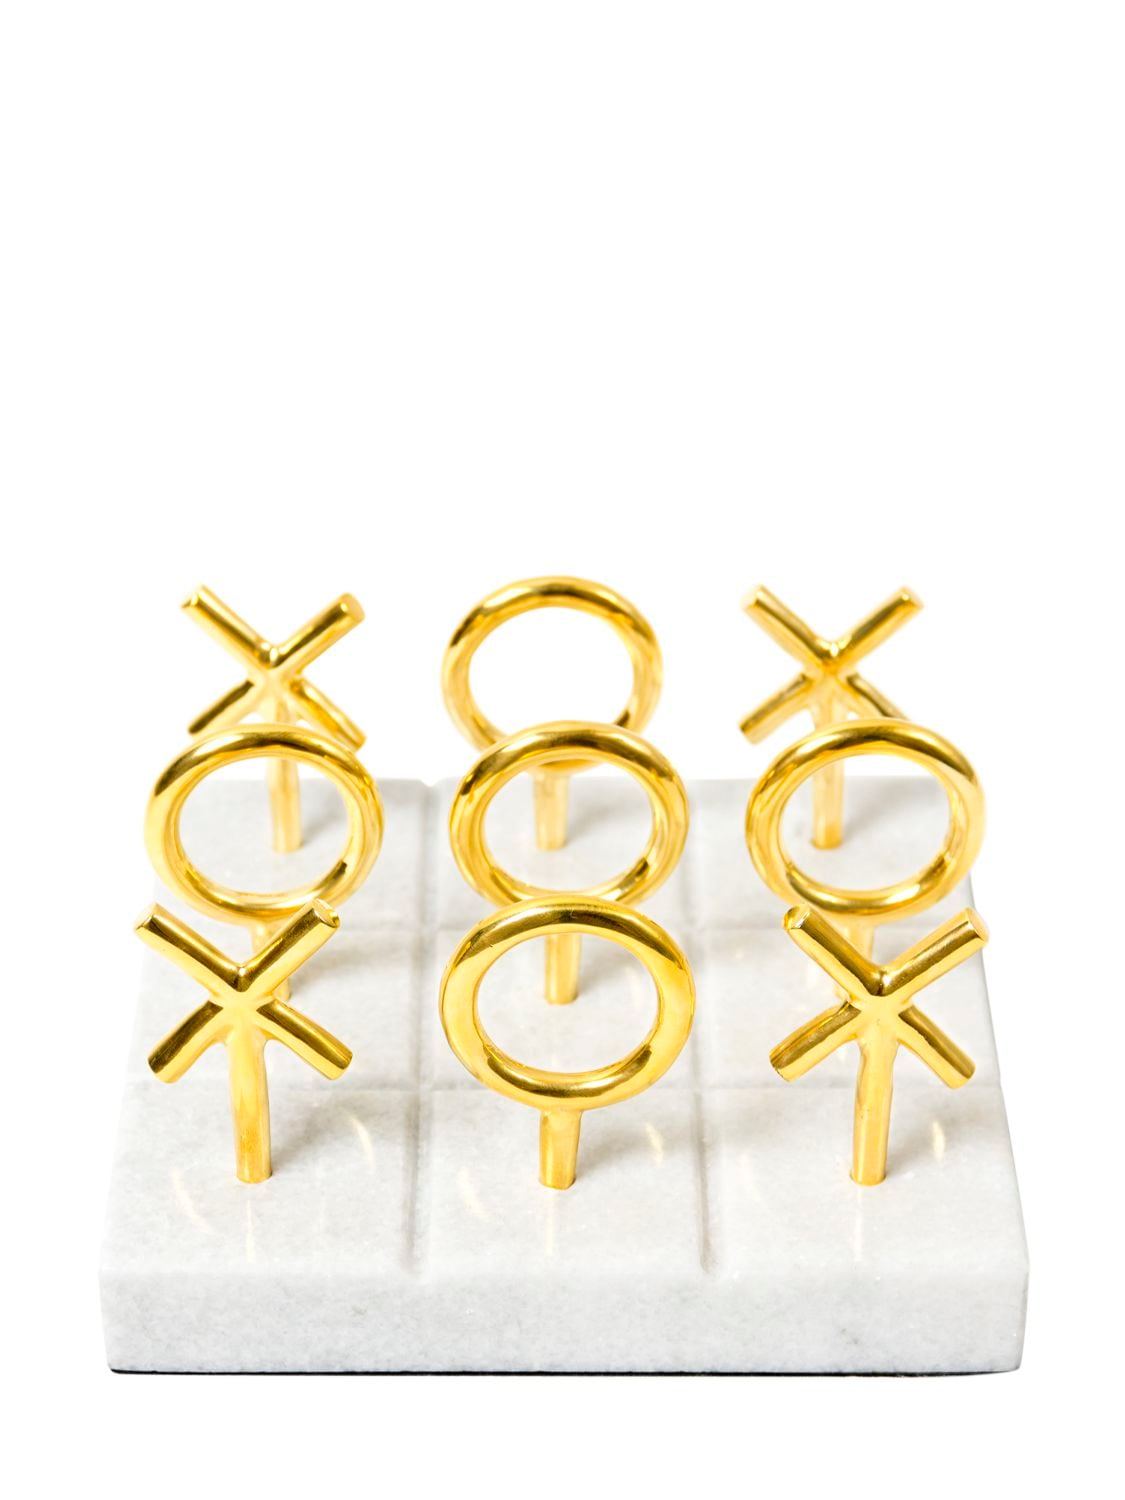 Image of Marble & Brass Tic Tac Toe Set